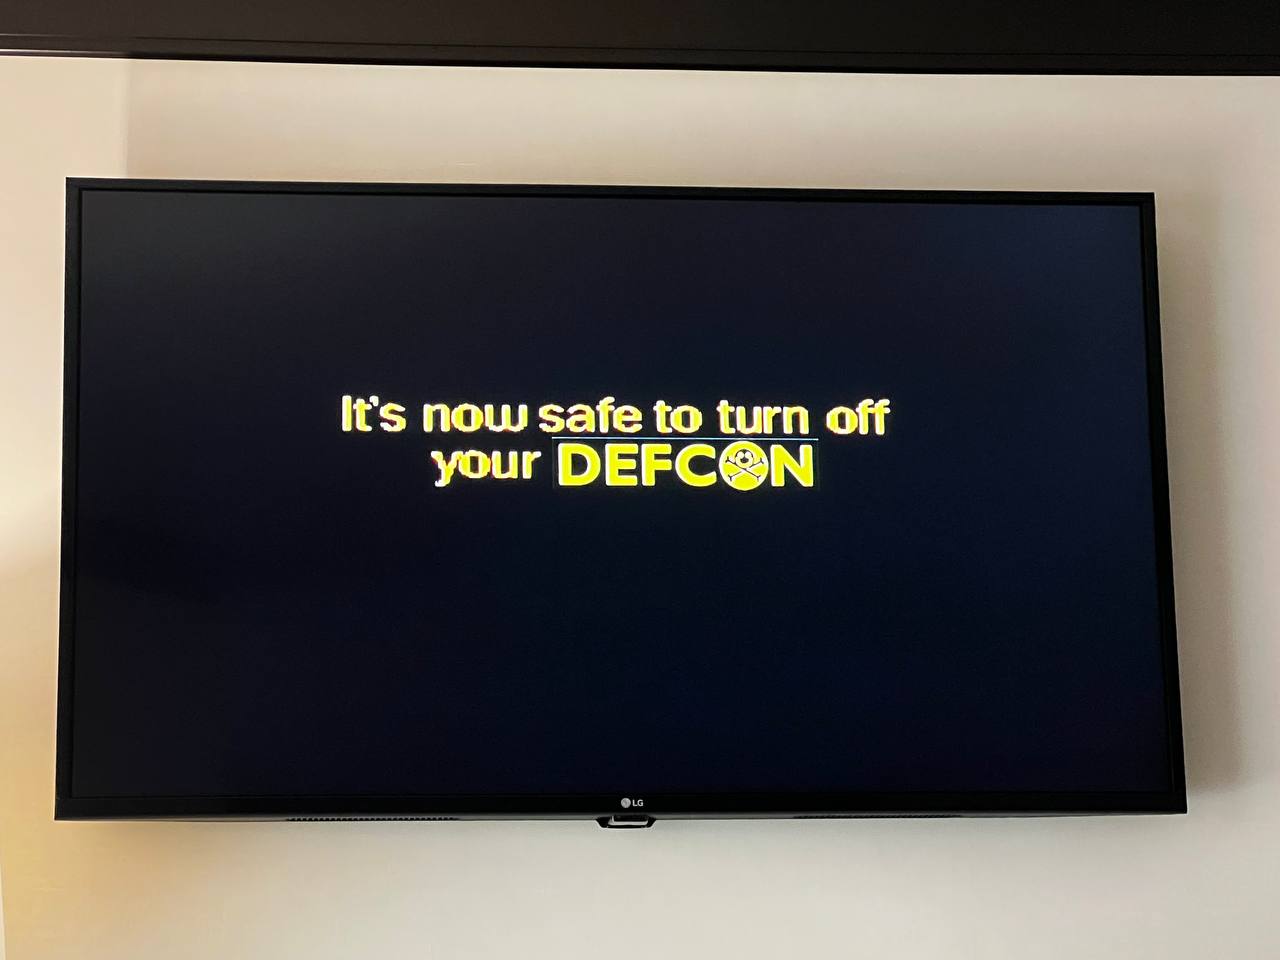 It is now safe to turn off your def con